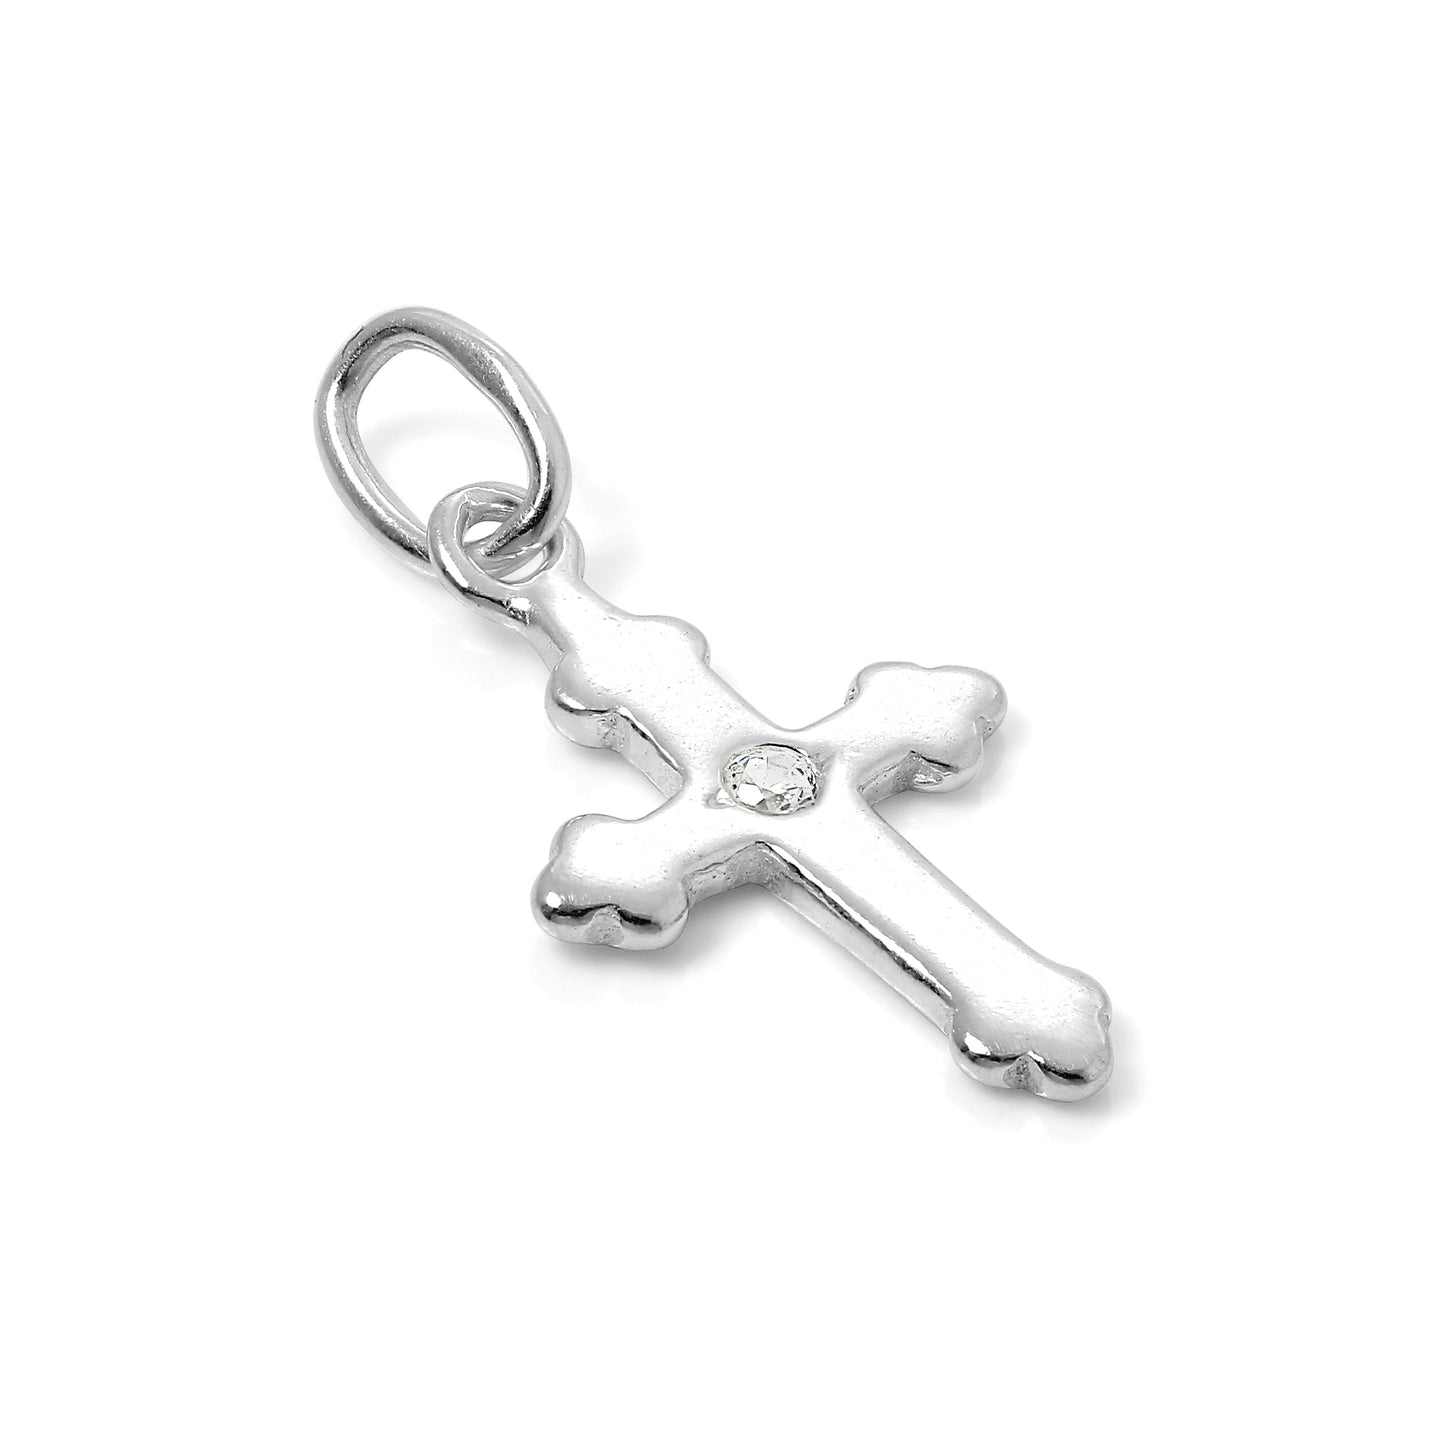 Tiny Sterling Silver Gothic Cross Charm with Single CZ Crystal